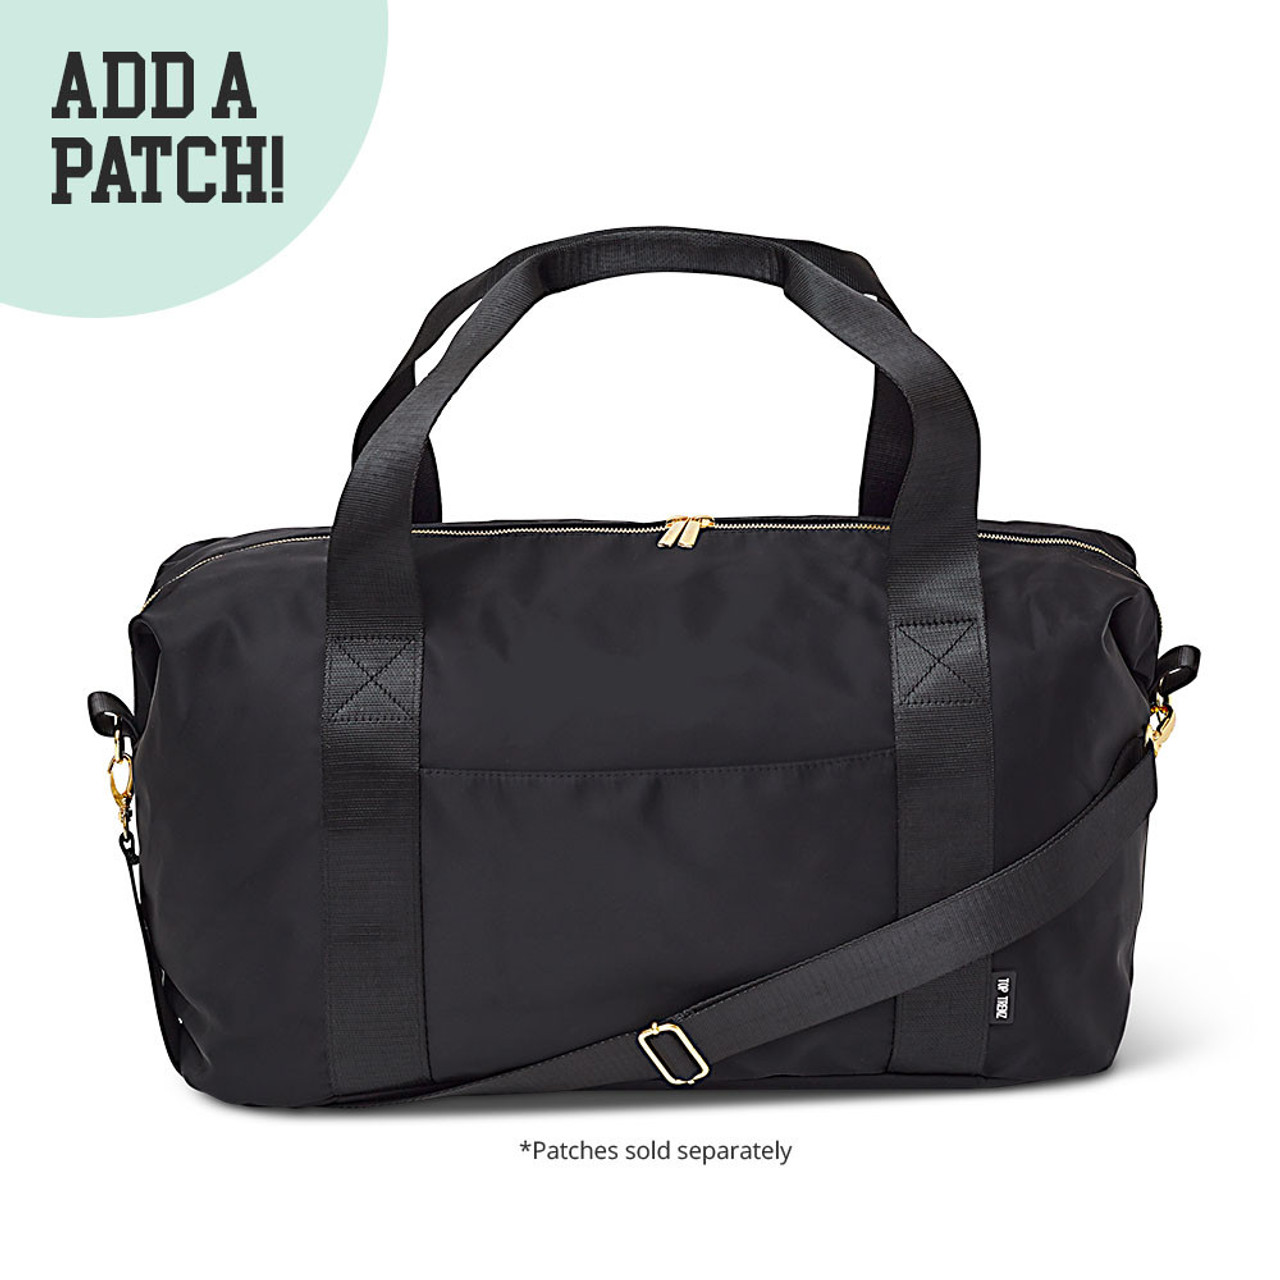 Top Trenz Oversized Duffle Bag in Black with custom Top Trenz Patches